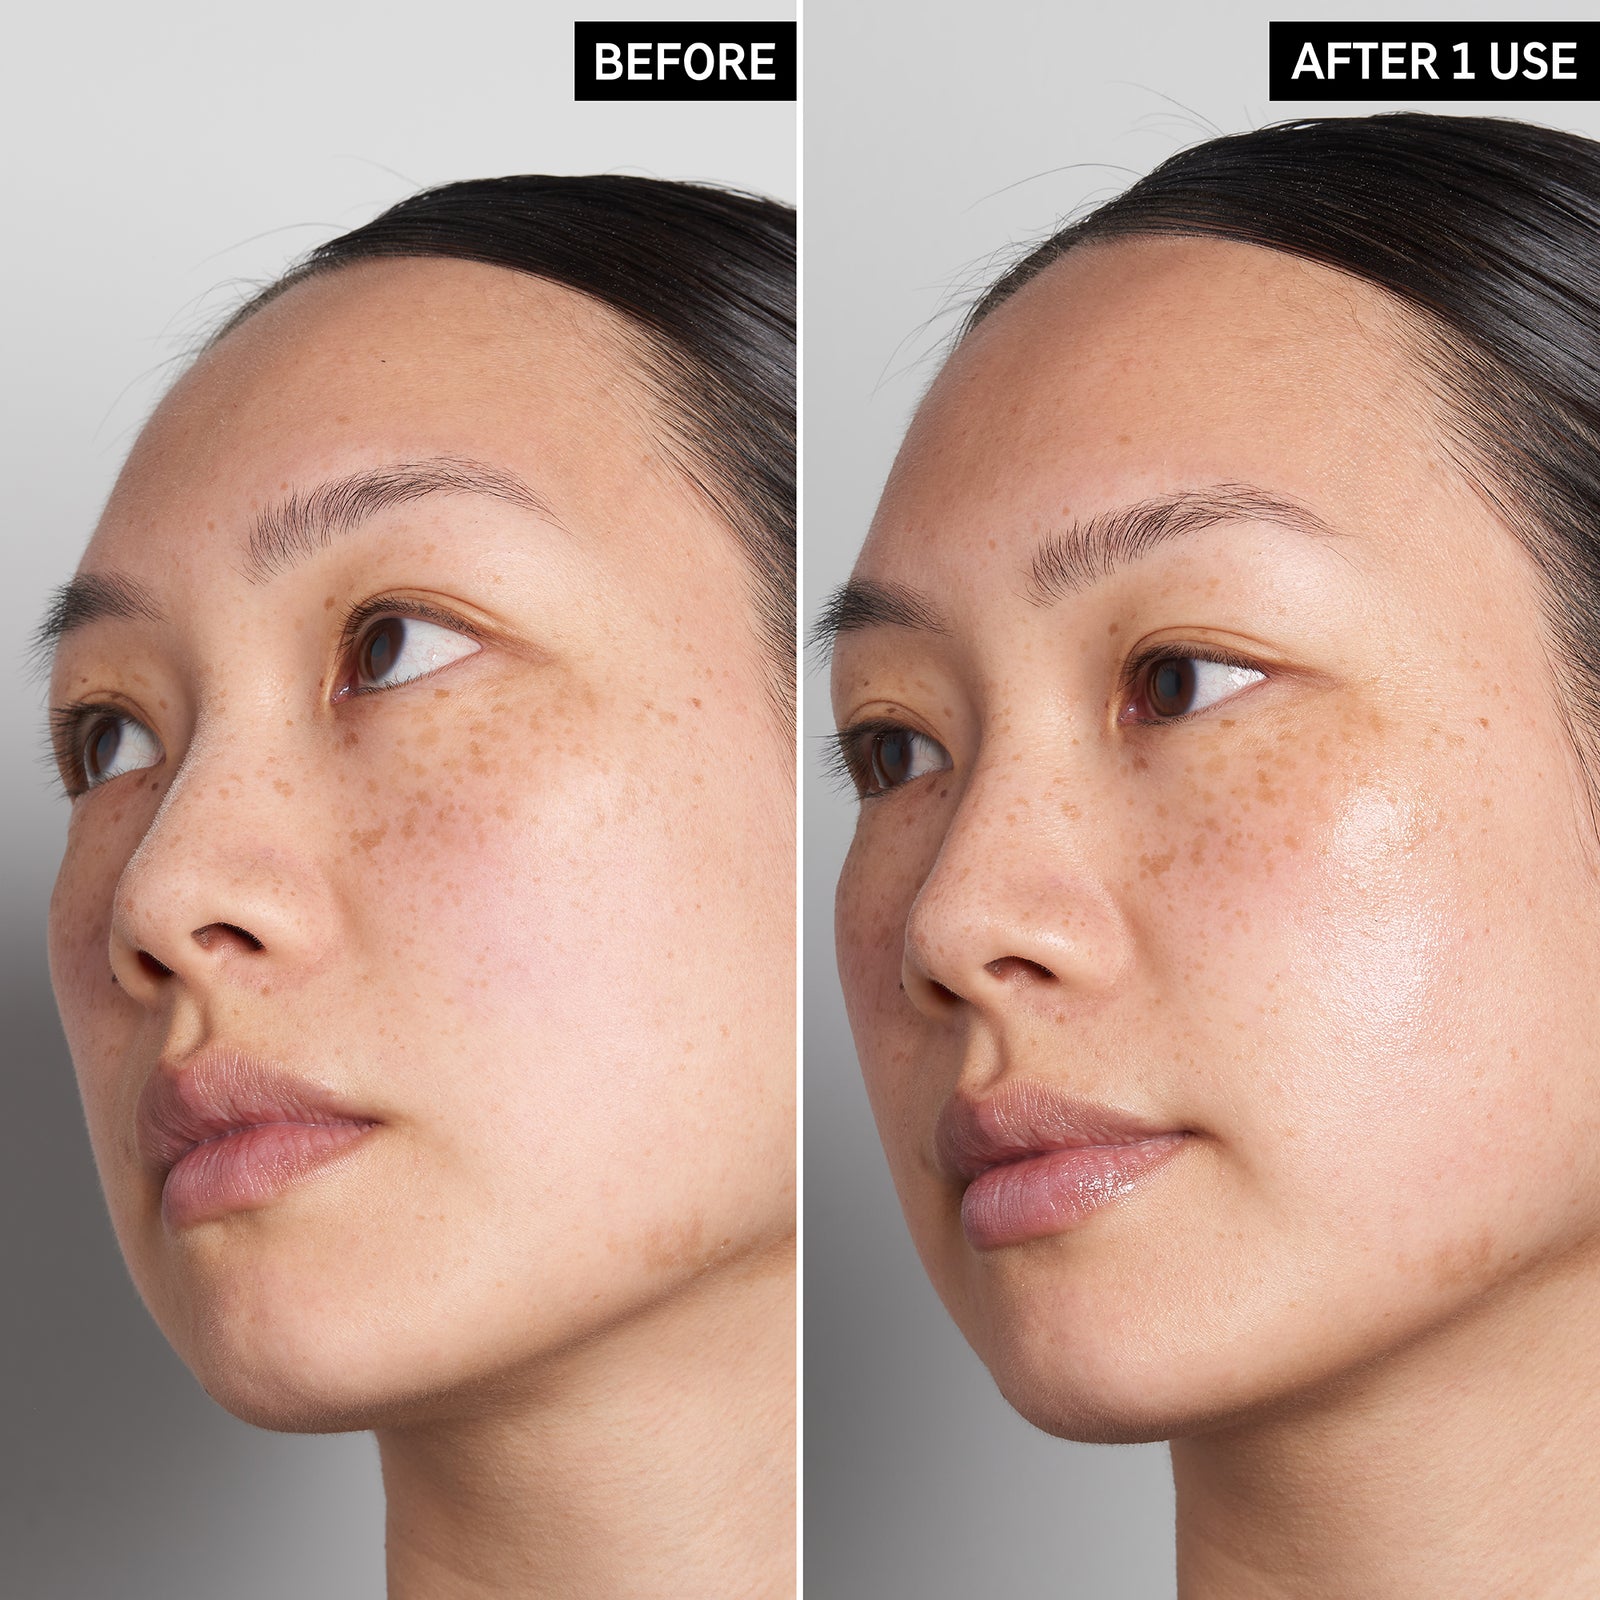 2 images of a model's face side by side to show the before and after using Hyaluronic Acid Serum just once